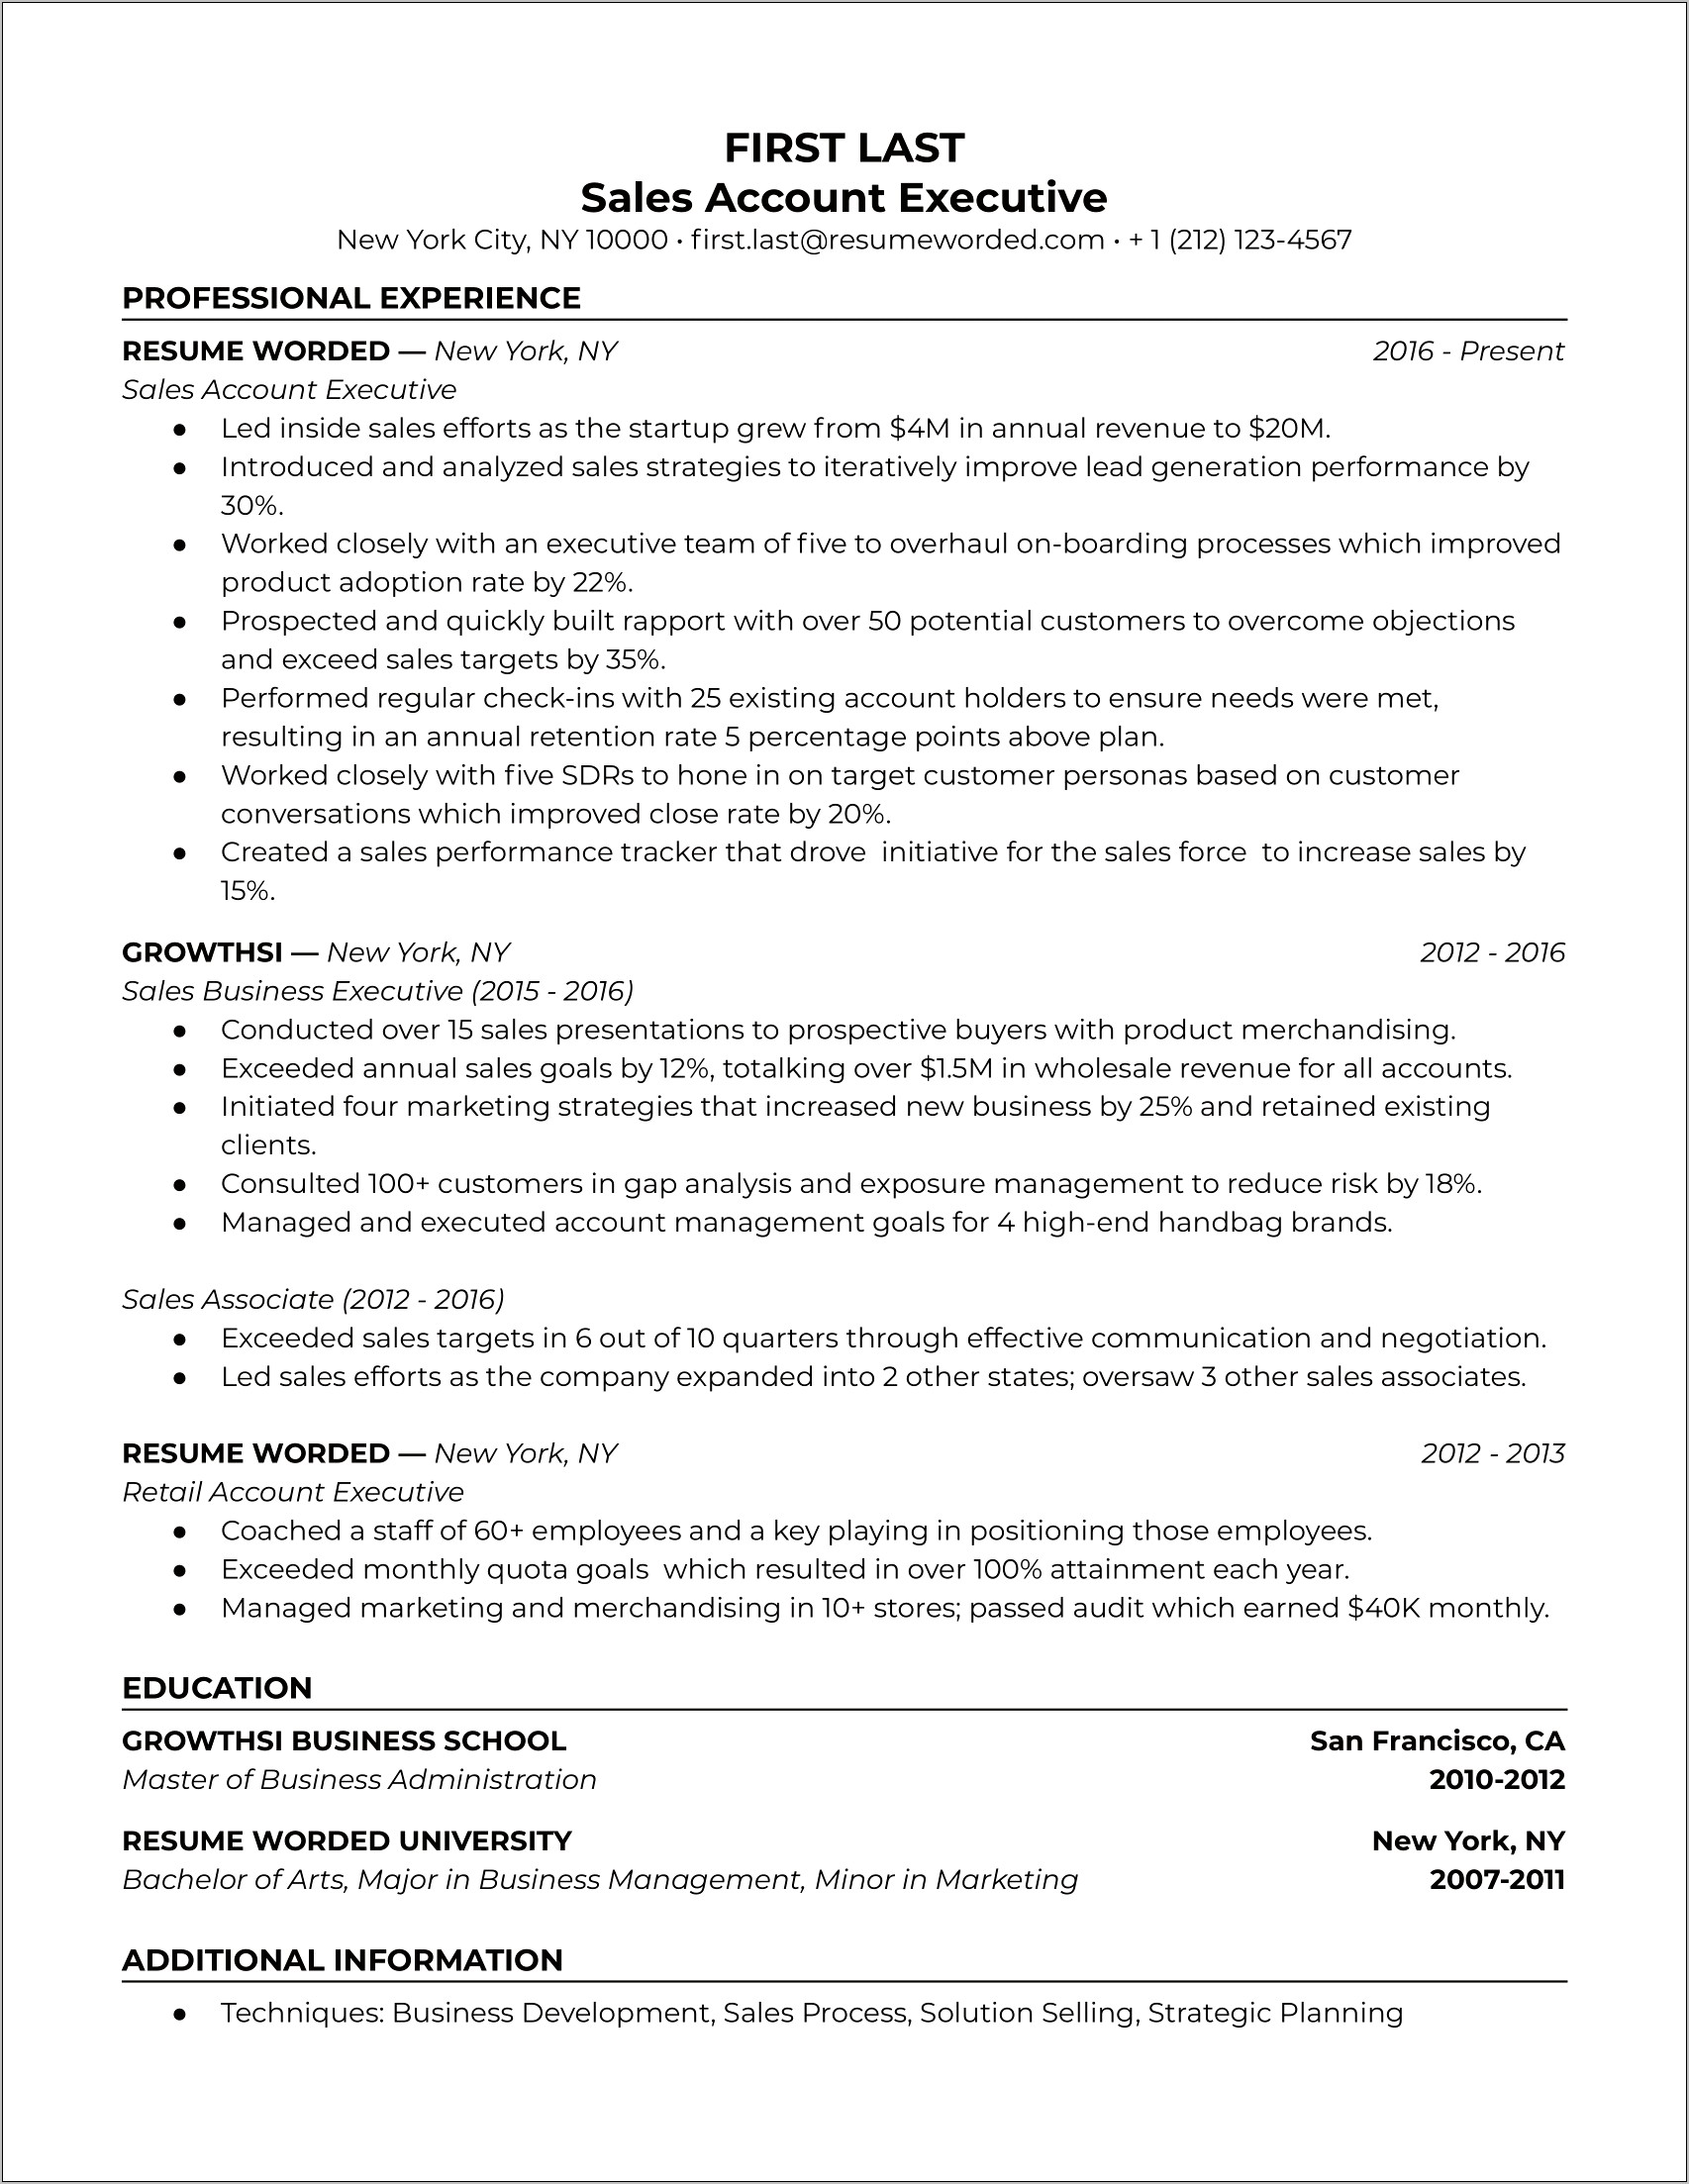 Resume Summary Samples For Sales